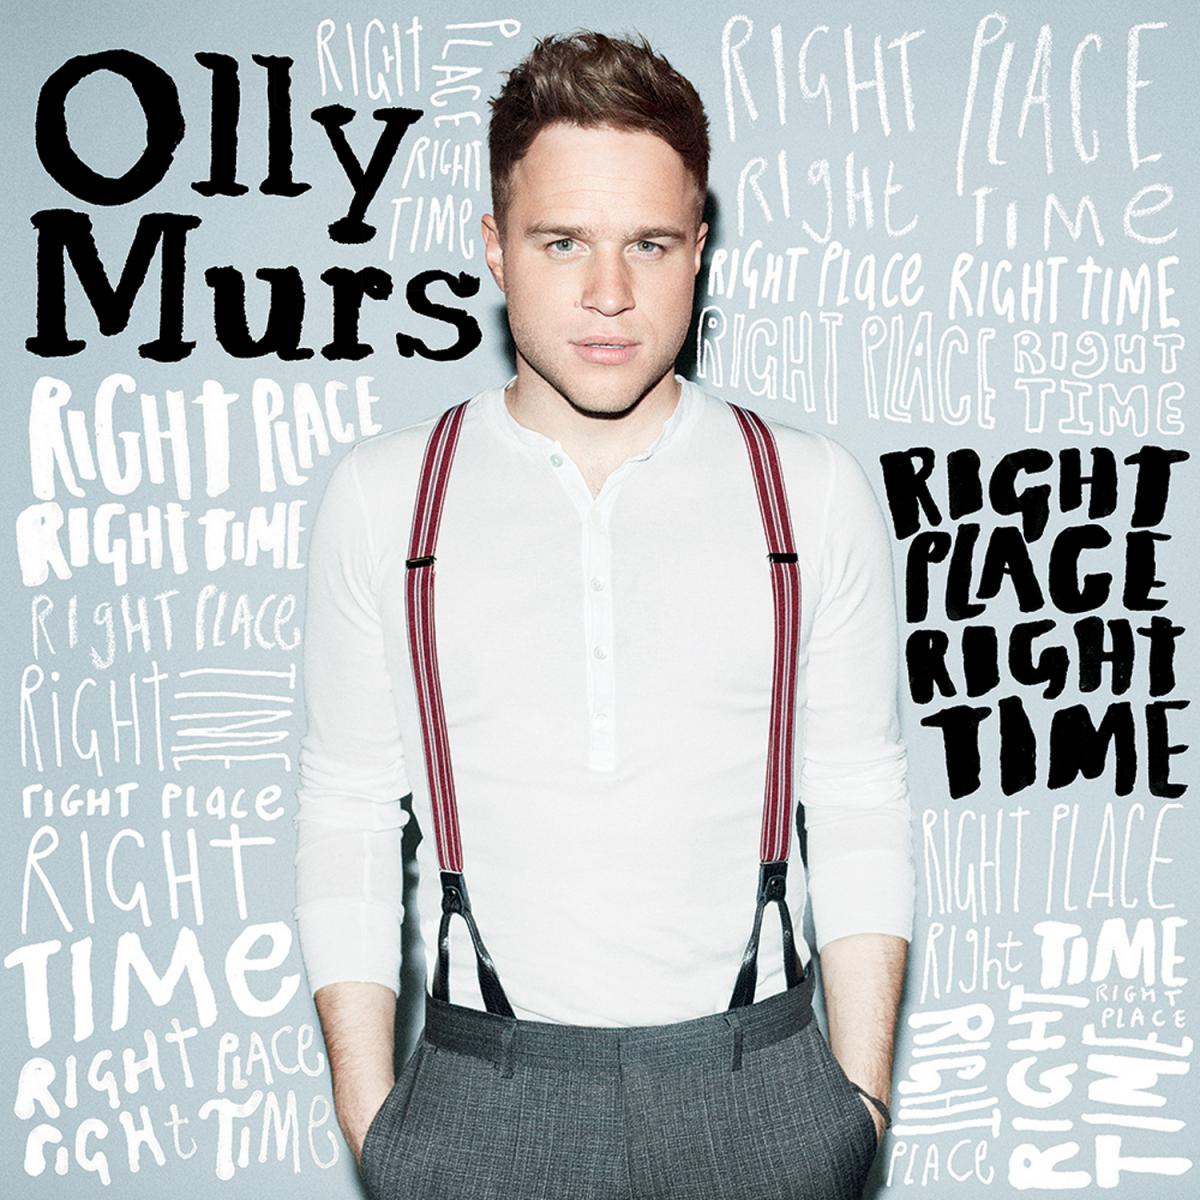 Olly Murs - "Right Place Right Time"